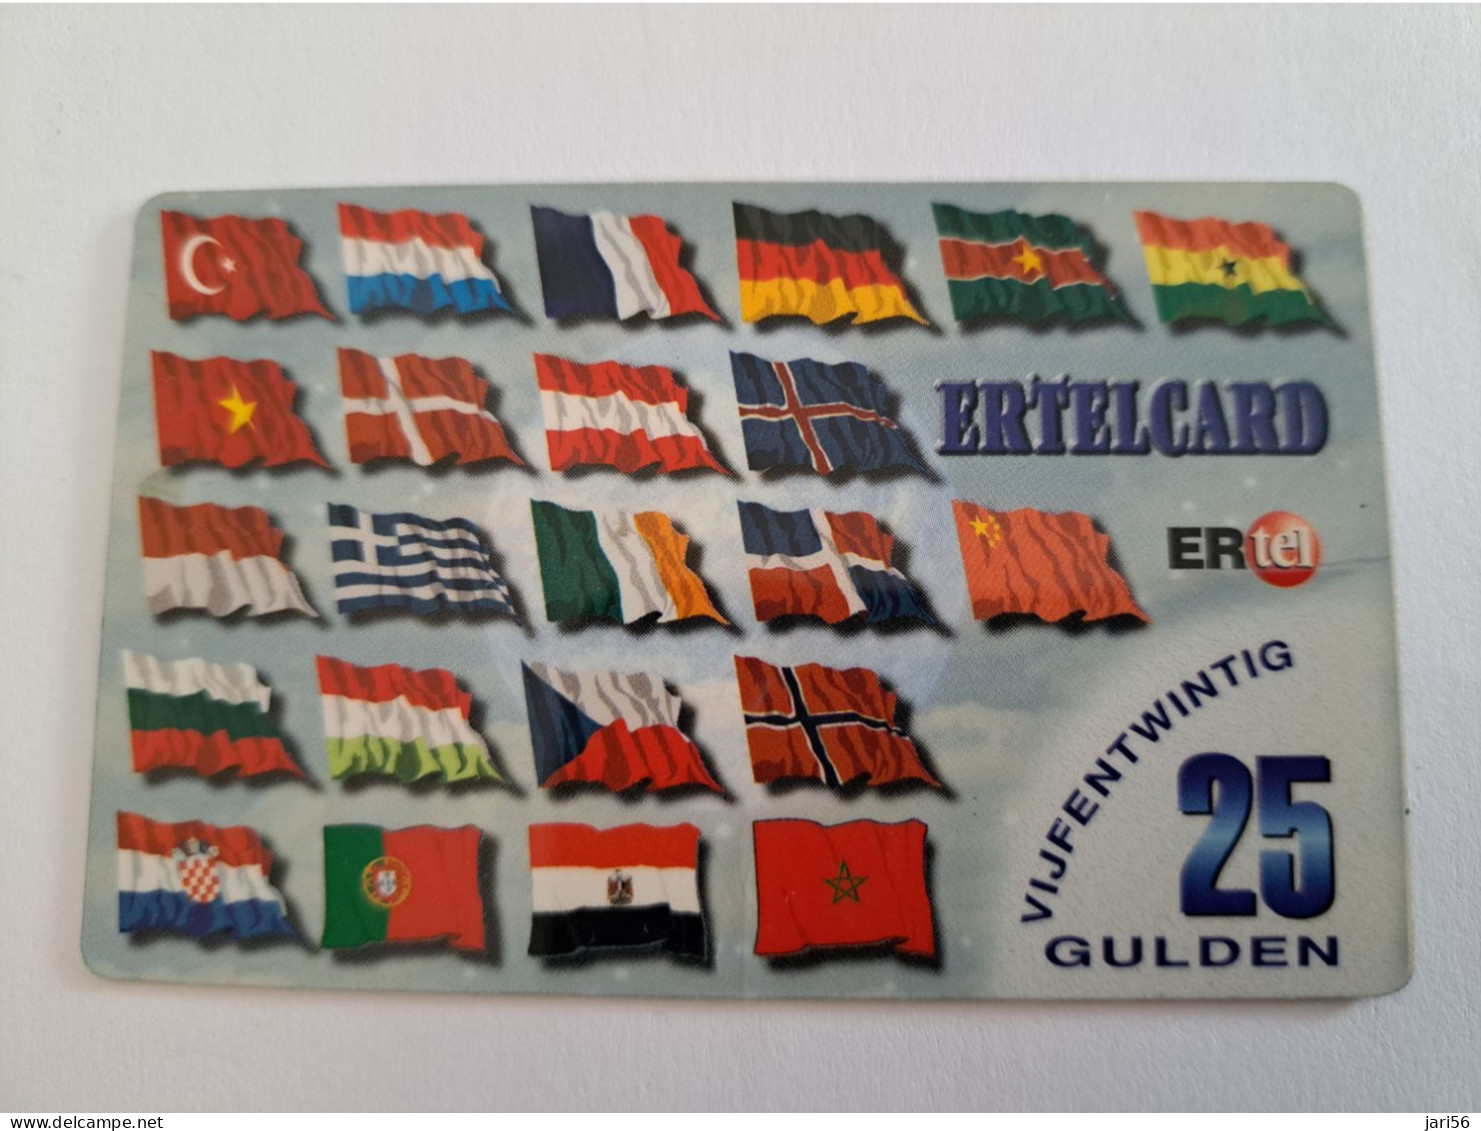 NETHERLANDS/ PREPAID/  HFL 25,- /FLAGS OF THE DIFFERENT COUNTRYS/   - USED CARD  ** 13938** - [3] Sim Cards, Prepaid & Refills